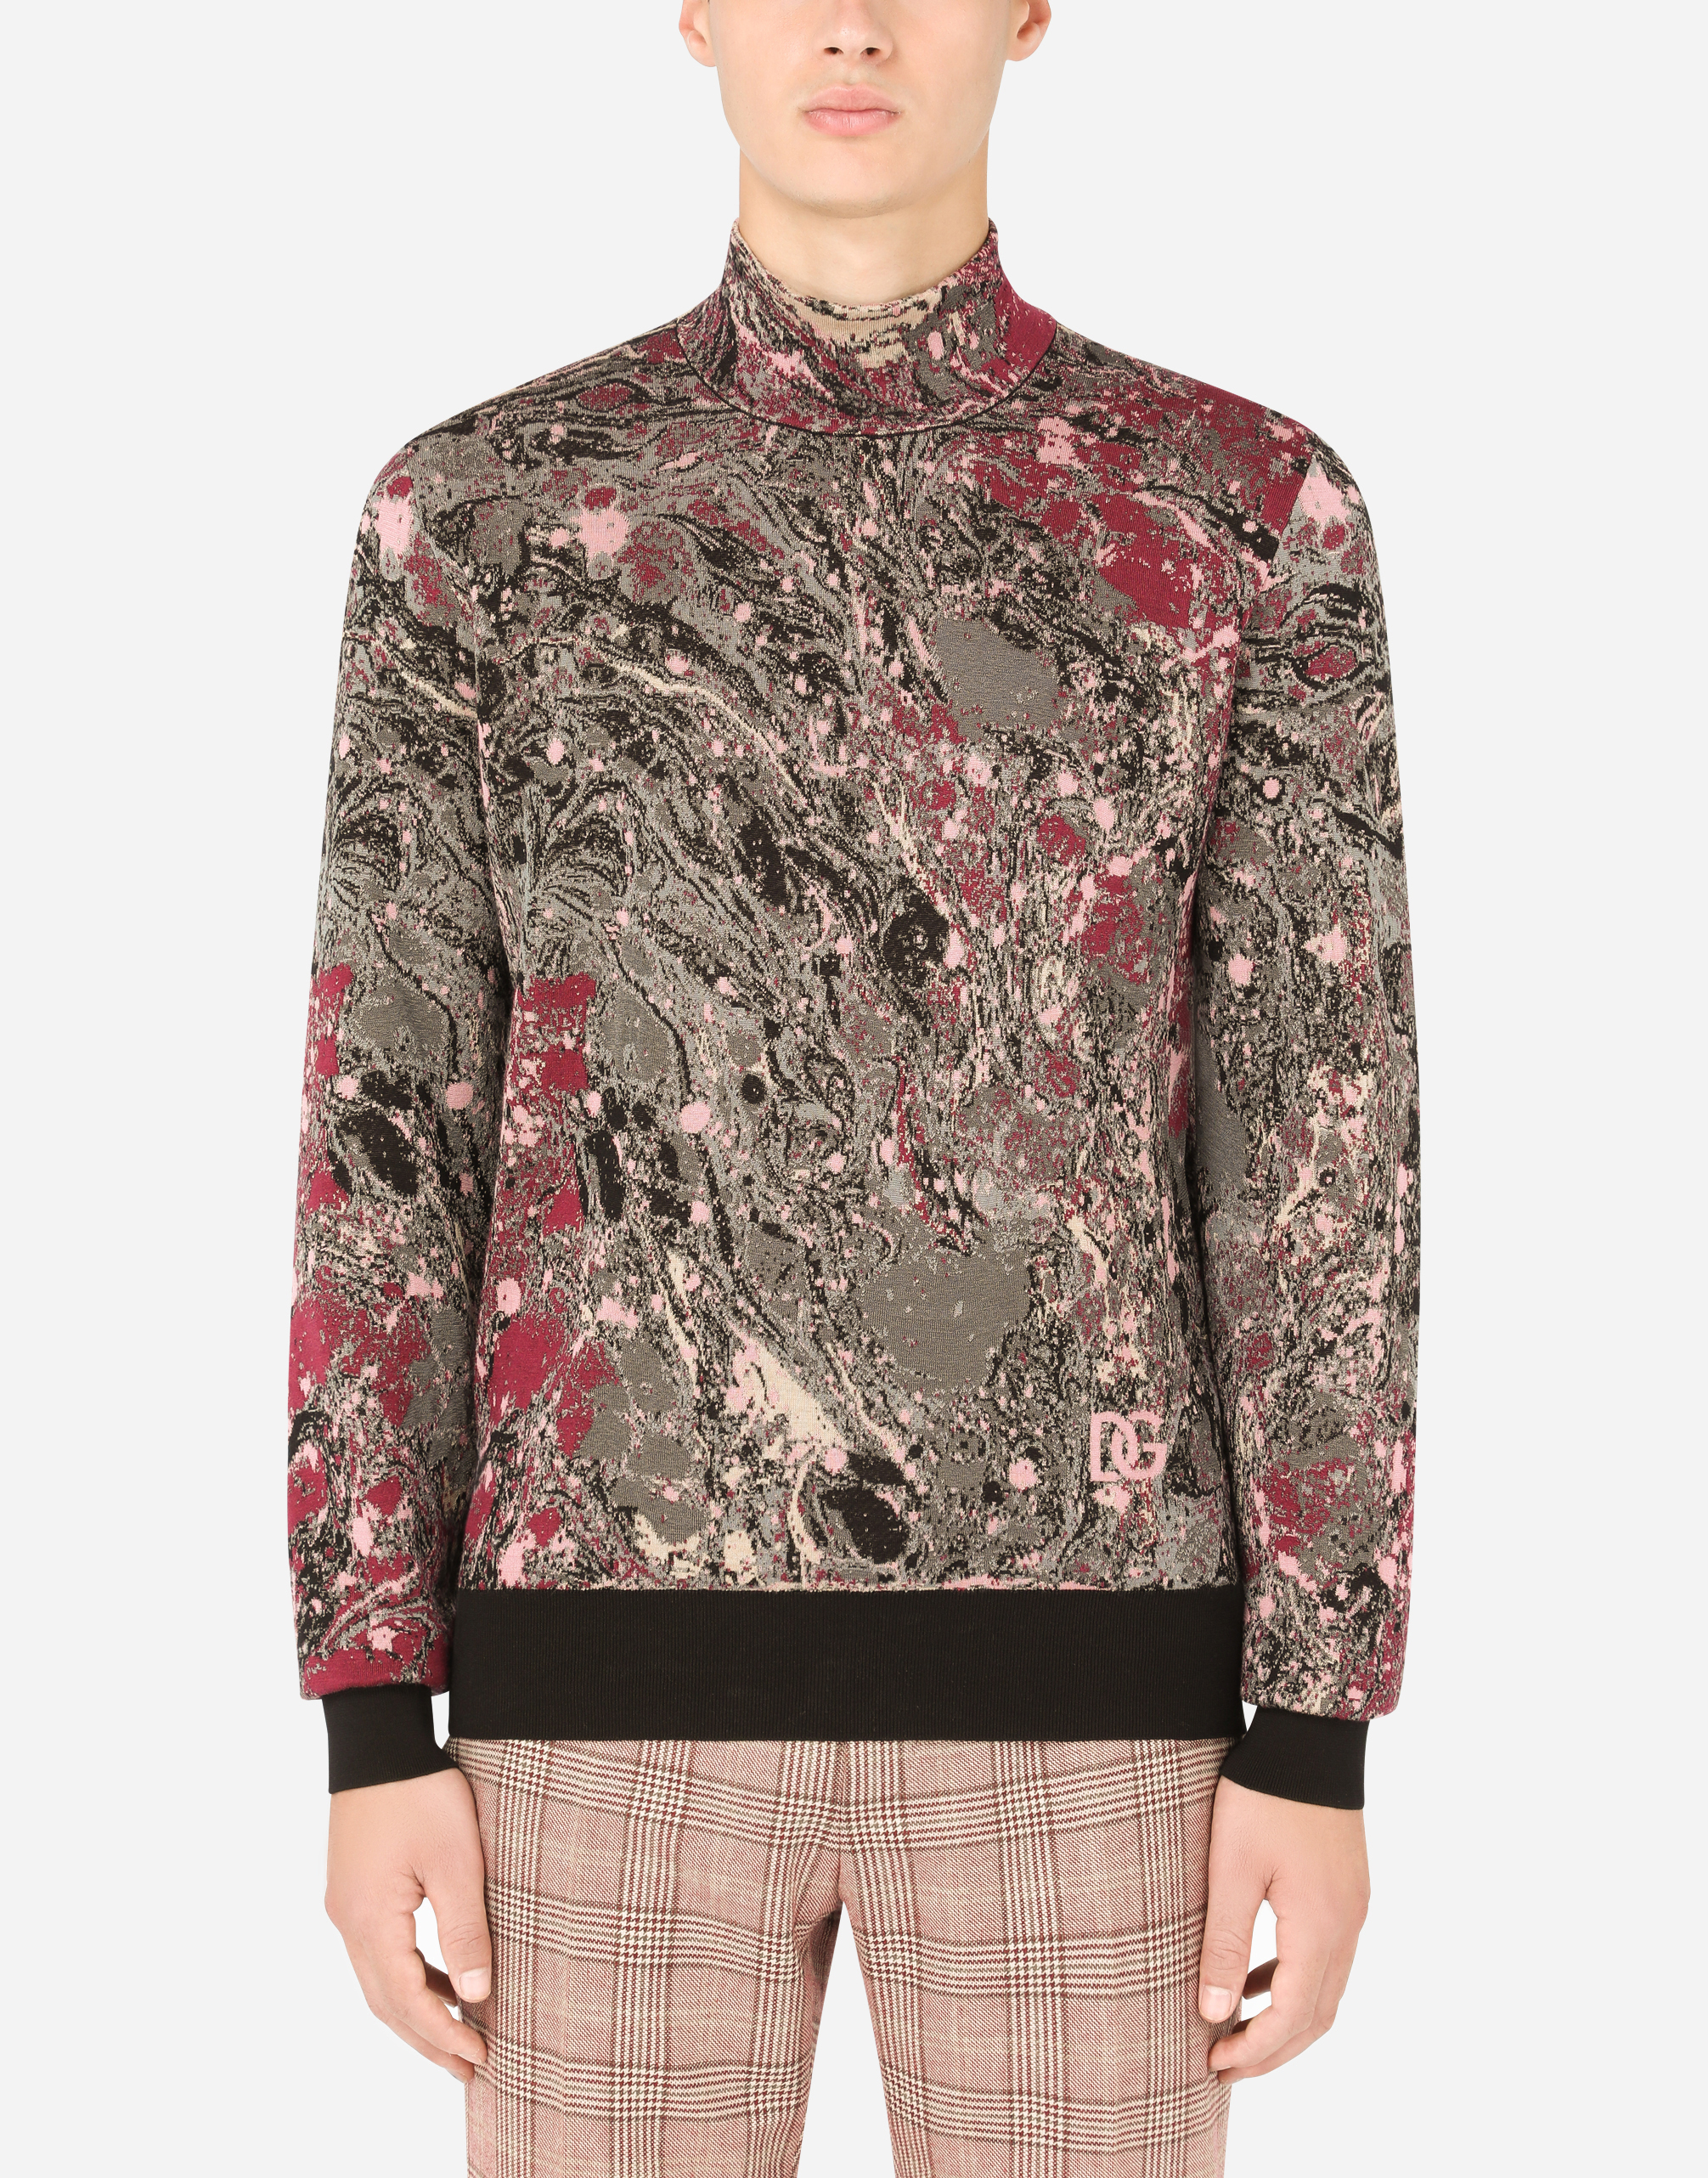 DOLCE & GABBANA JACQUARD TURTLE-NECK SWEATER WITH MARBLED DESIGN